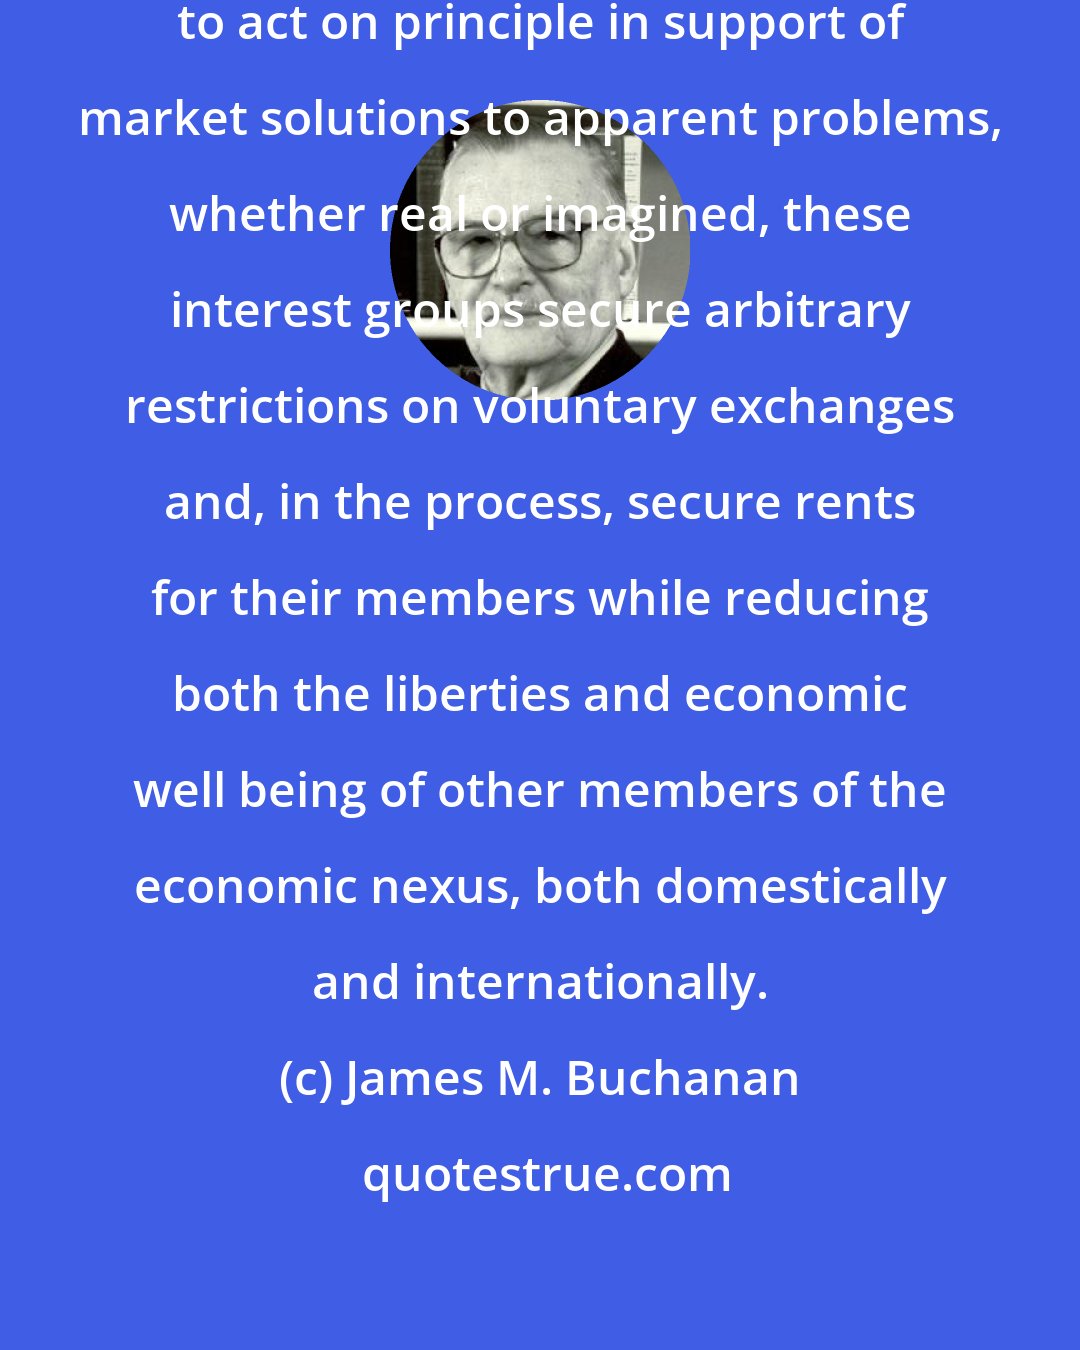 James M. Buchanan: Building on the public's unwillingness to act on principle in support of market solutions to apparent problems, whether real or imagined, these interest groups secure arbitrary restrictions on voluntary exchanges and, in the process, secure rents for their members while reducing both the liberties and economic well being of other members of the economic nexus, both domestically and internationally.